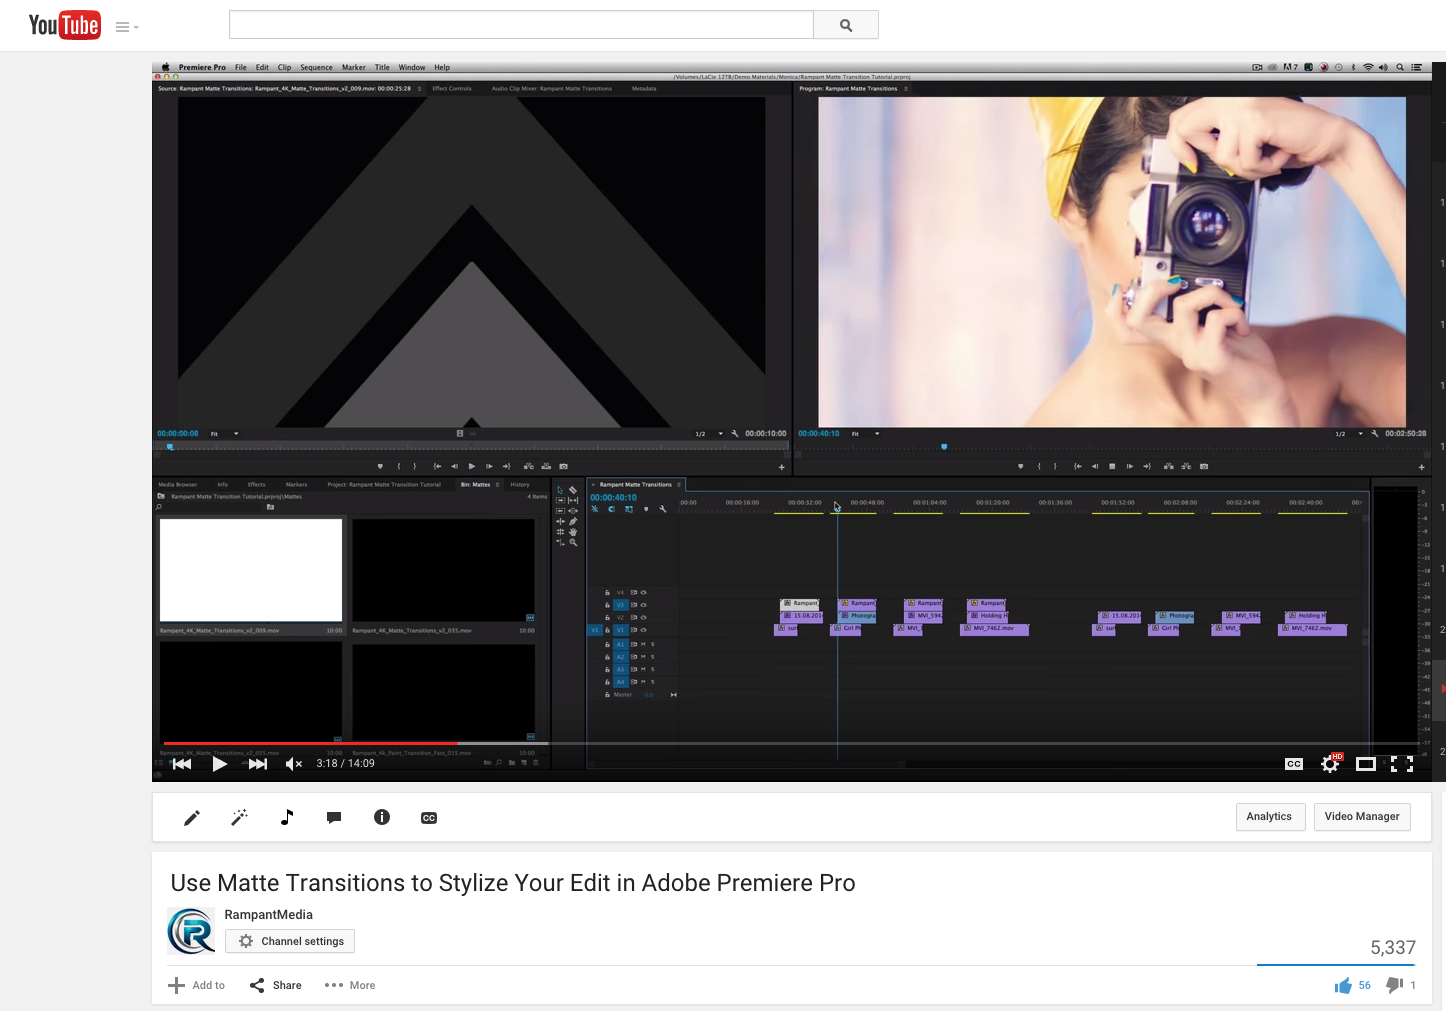 Use Matte Transitions to Stylize Your Edit in Adobe Premiere Pro